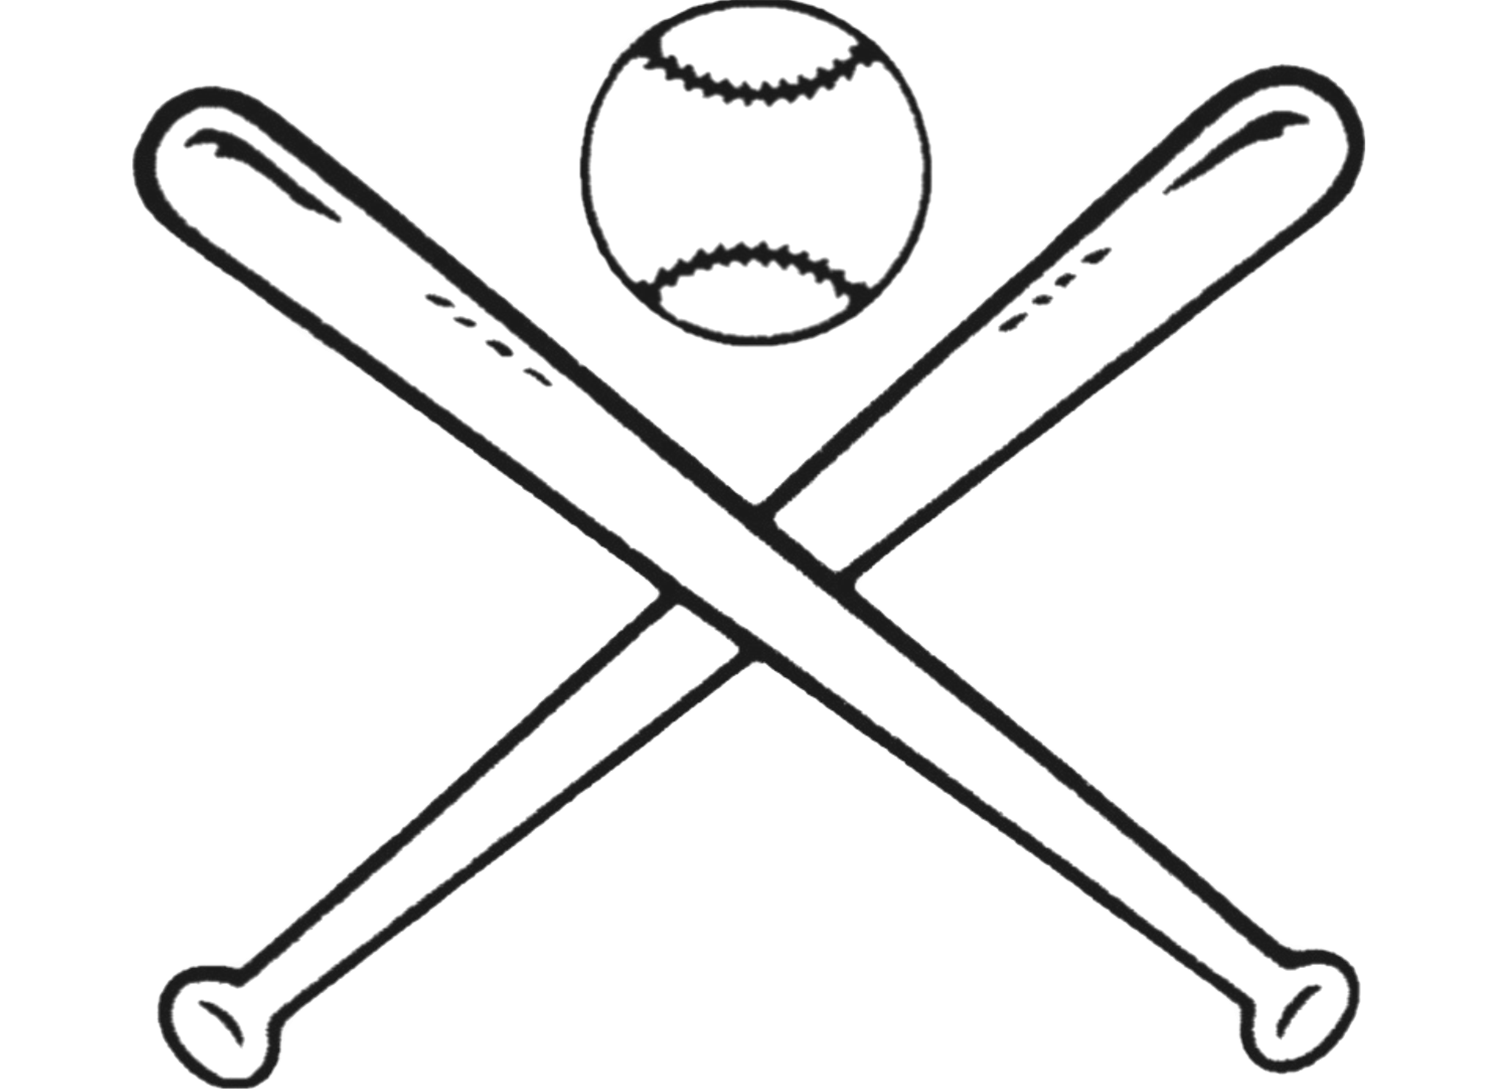 Baseball Bat and Ball Coloring Page clipart collection 6.